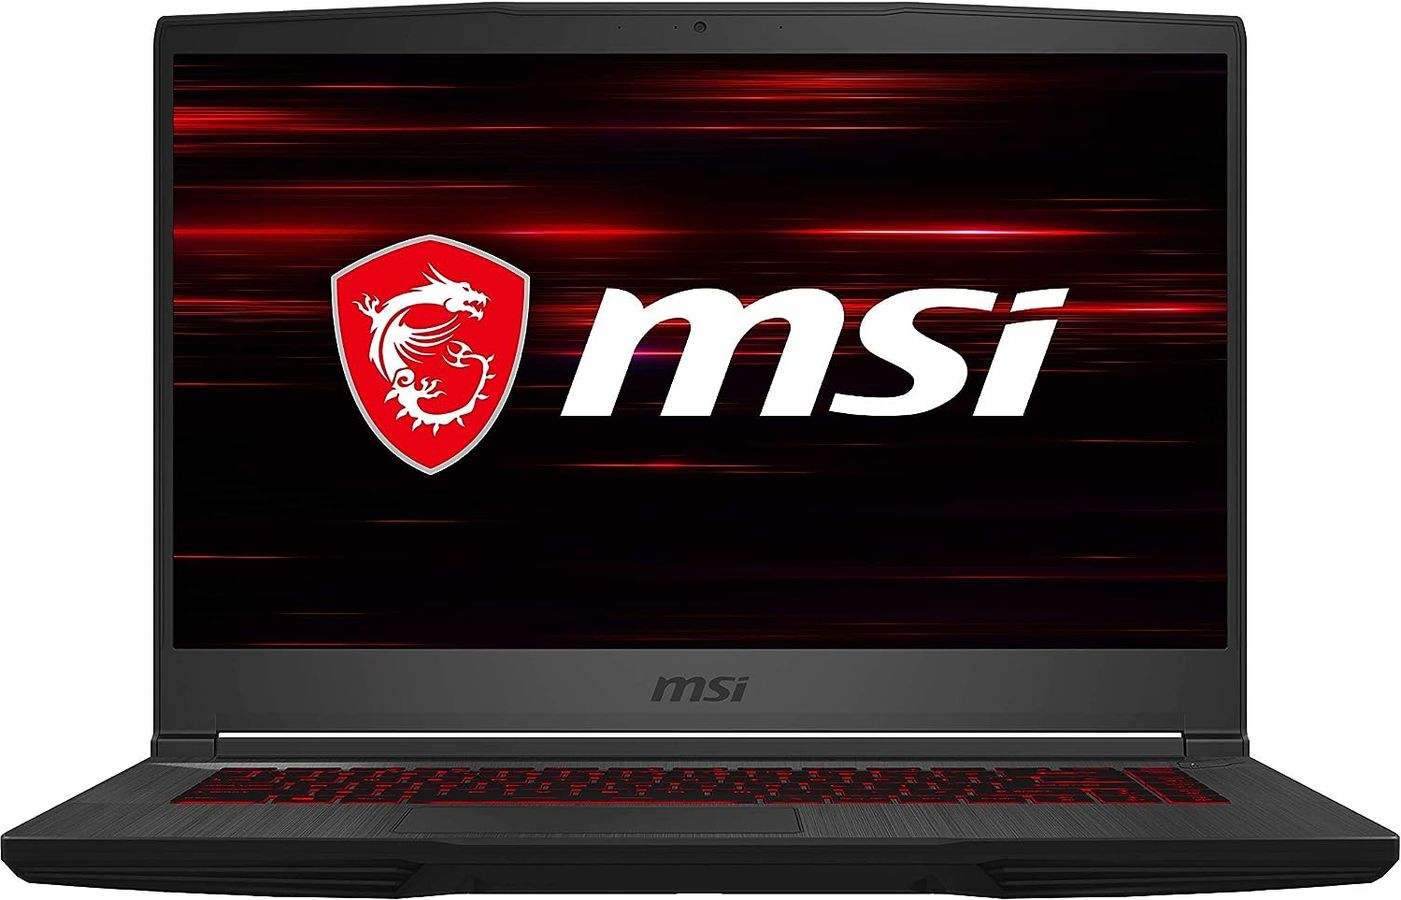 MSI GF65 product image of a black laptop featuring MSI branding in white on a red and black background on the display.